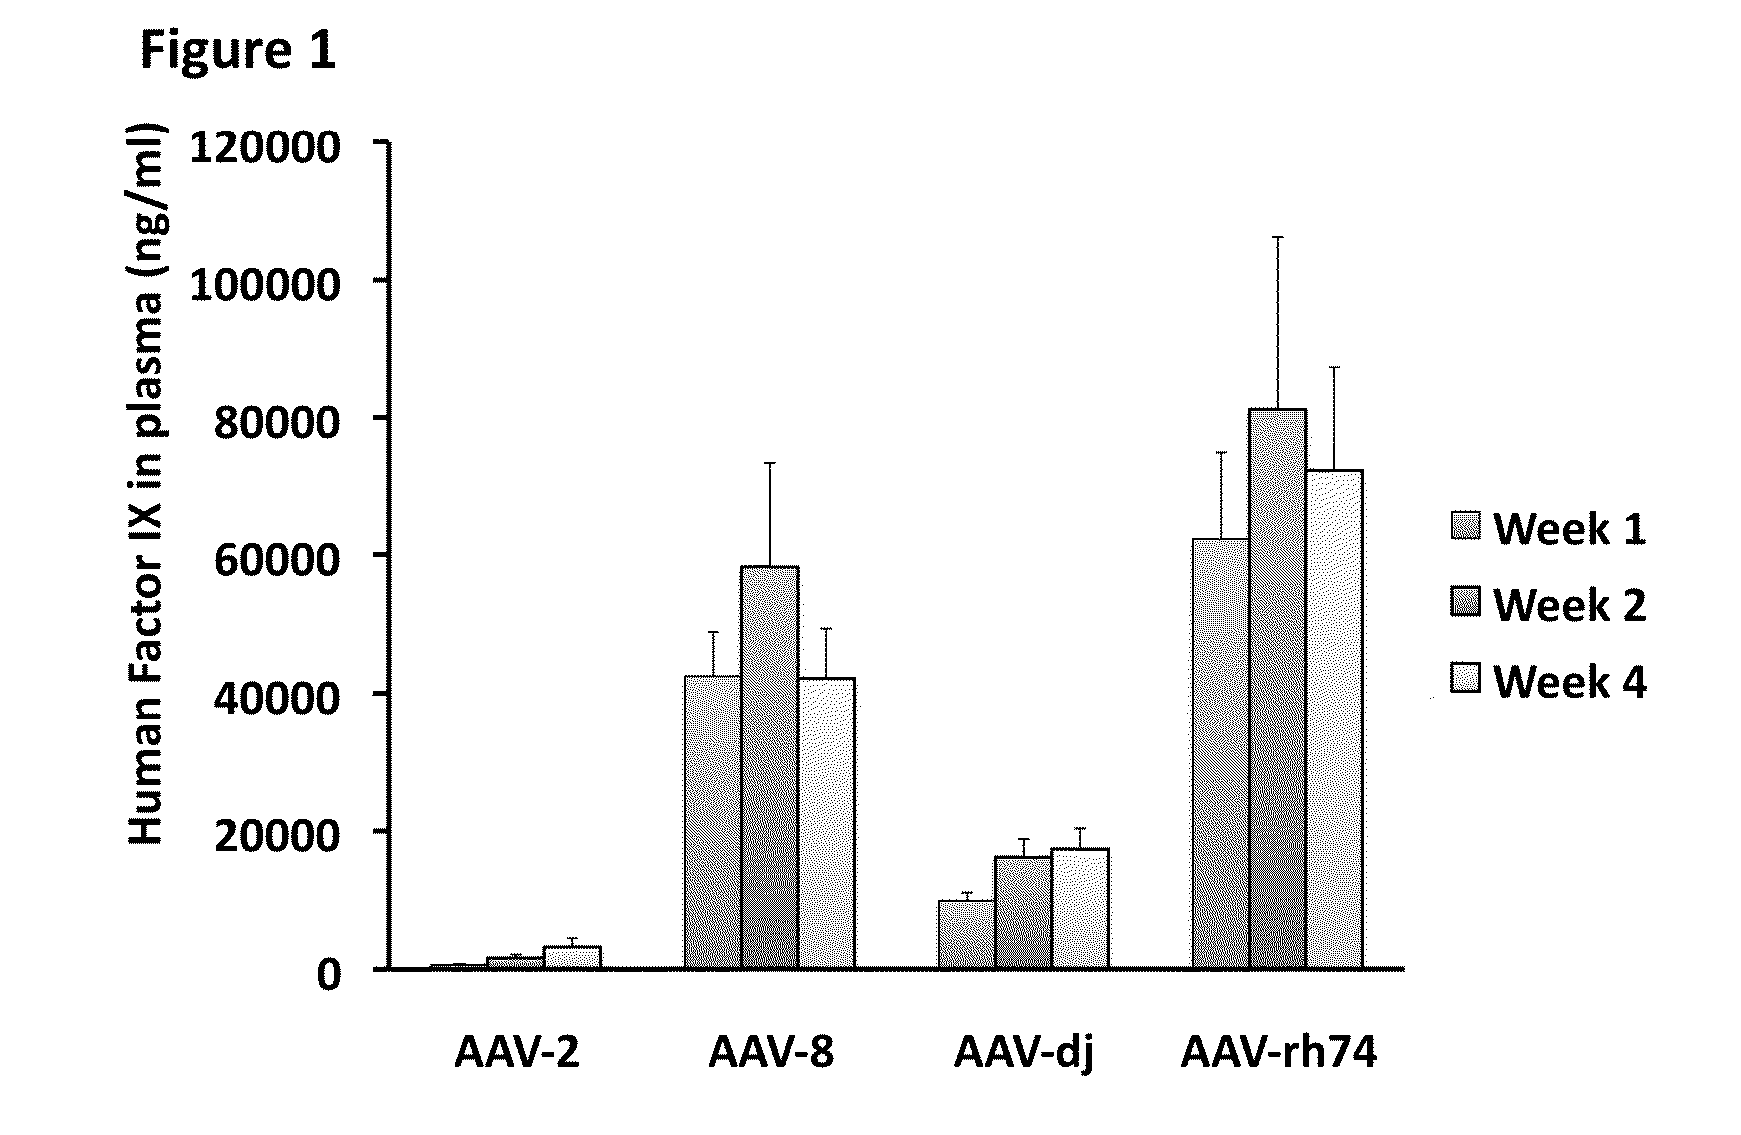 Aav vector compositions and methods for gene transfer to cells, organs and tissues